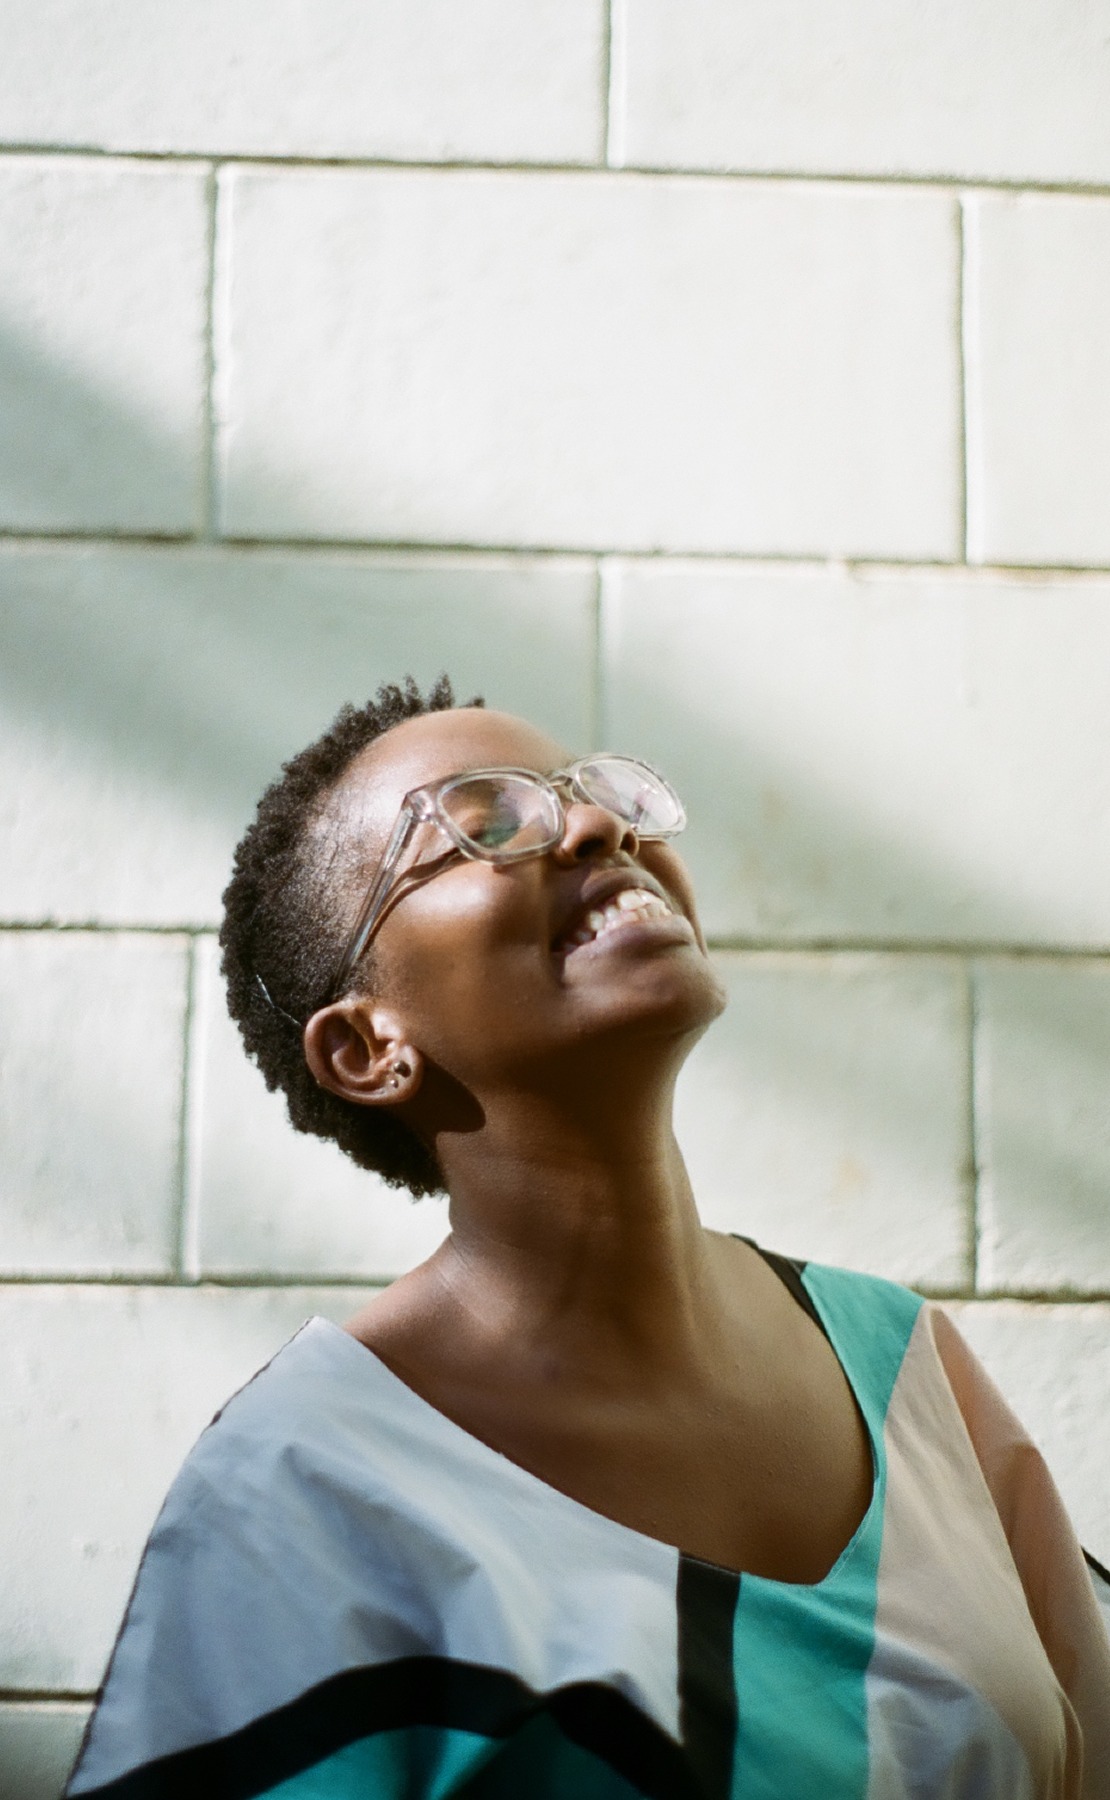 Photo portrait of young African woman smiling with short hair and glasses looking up.